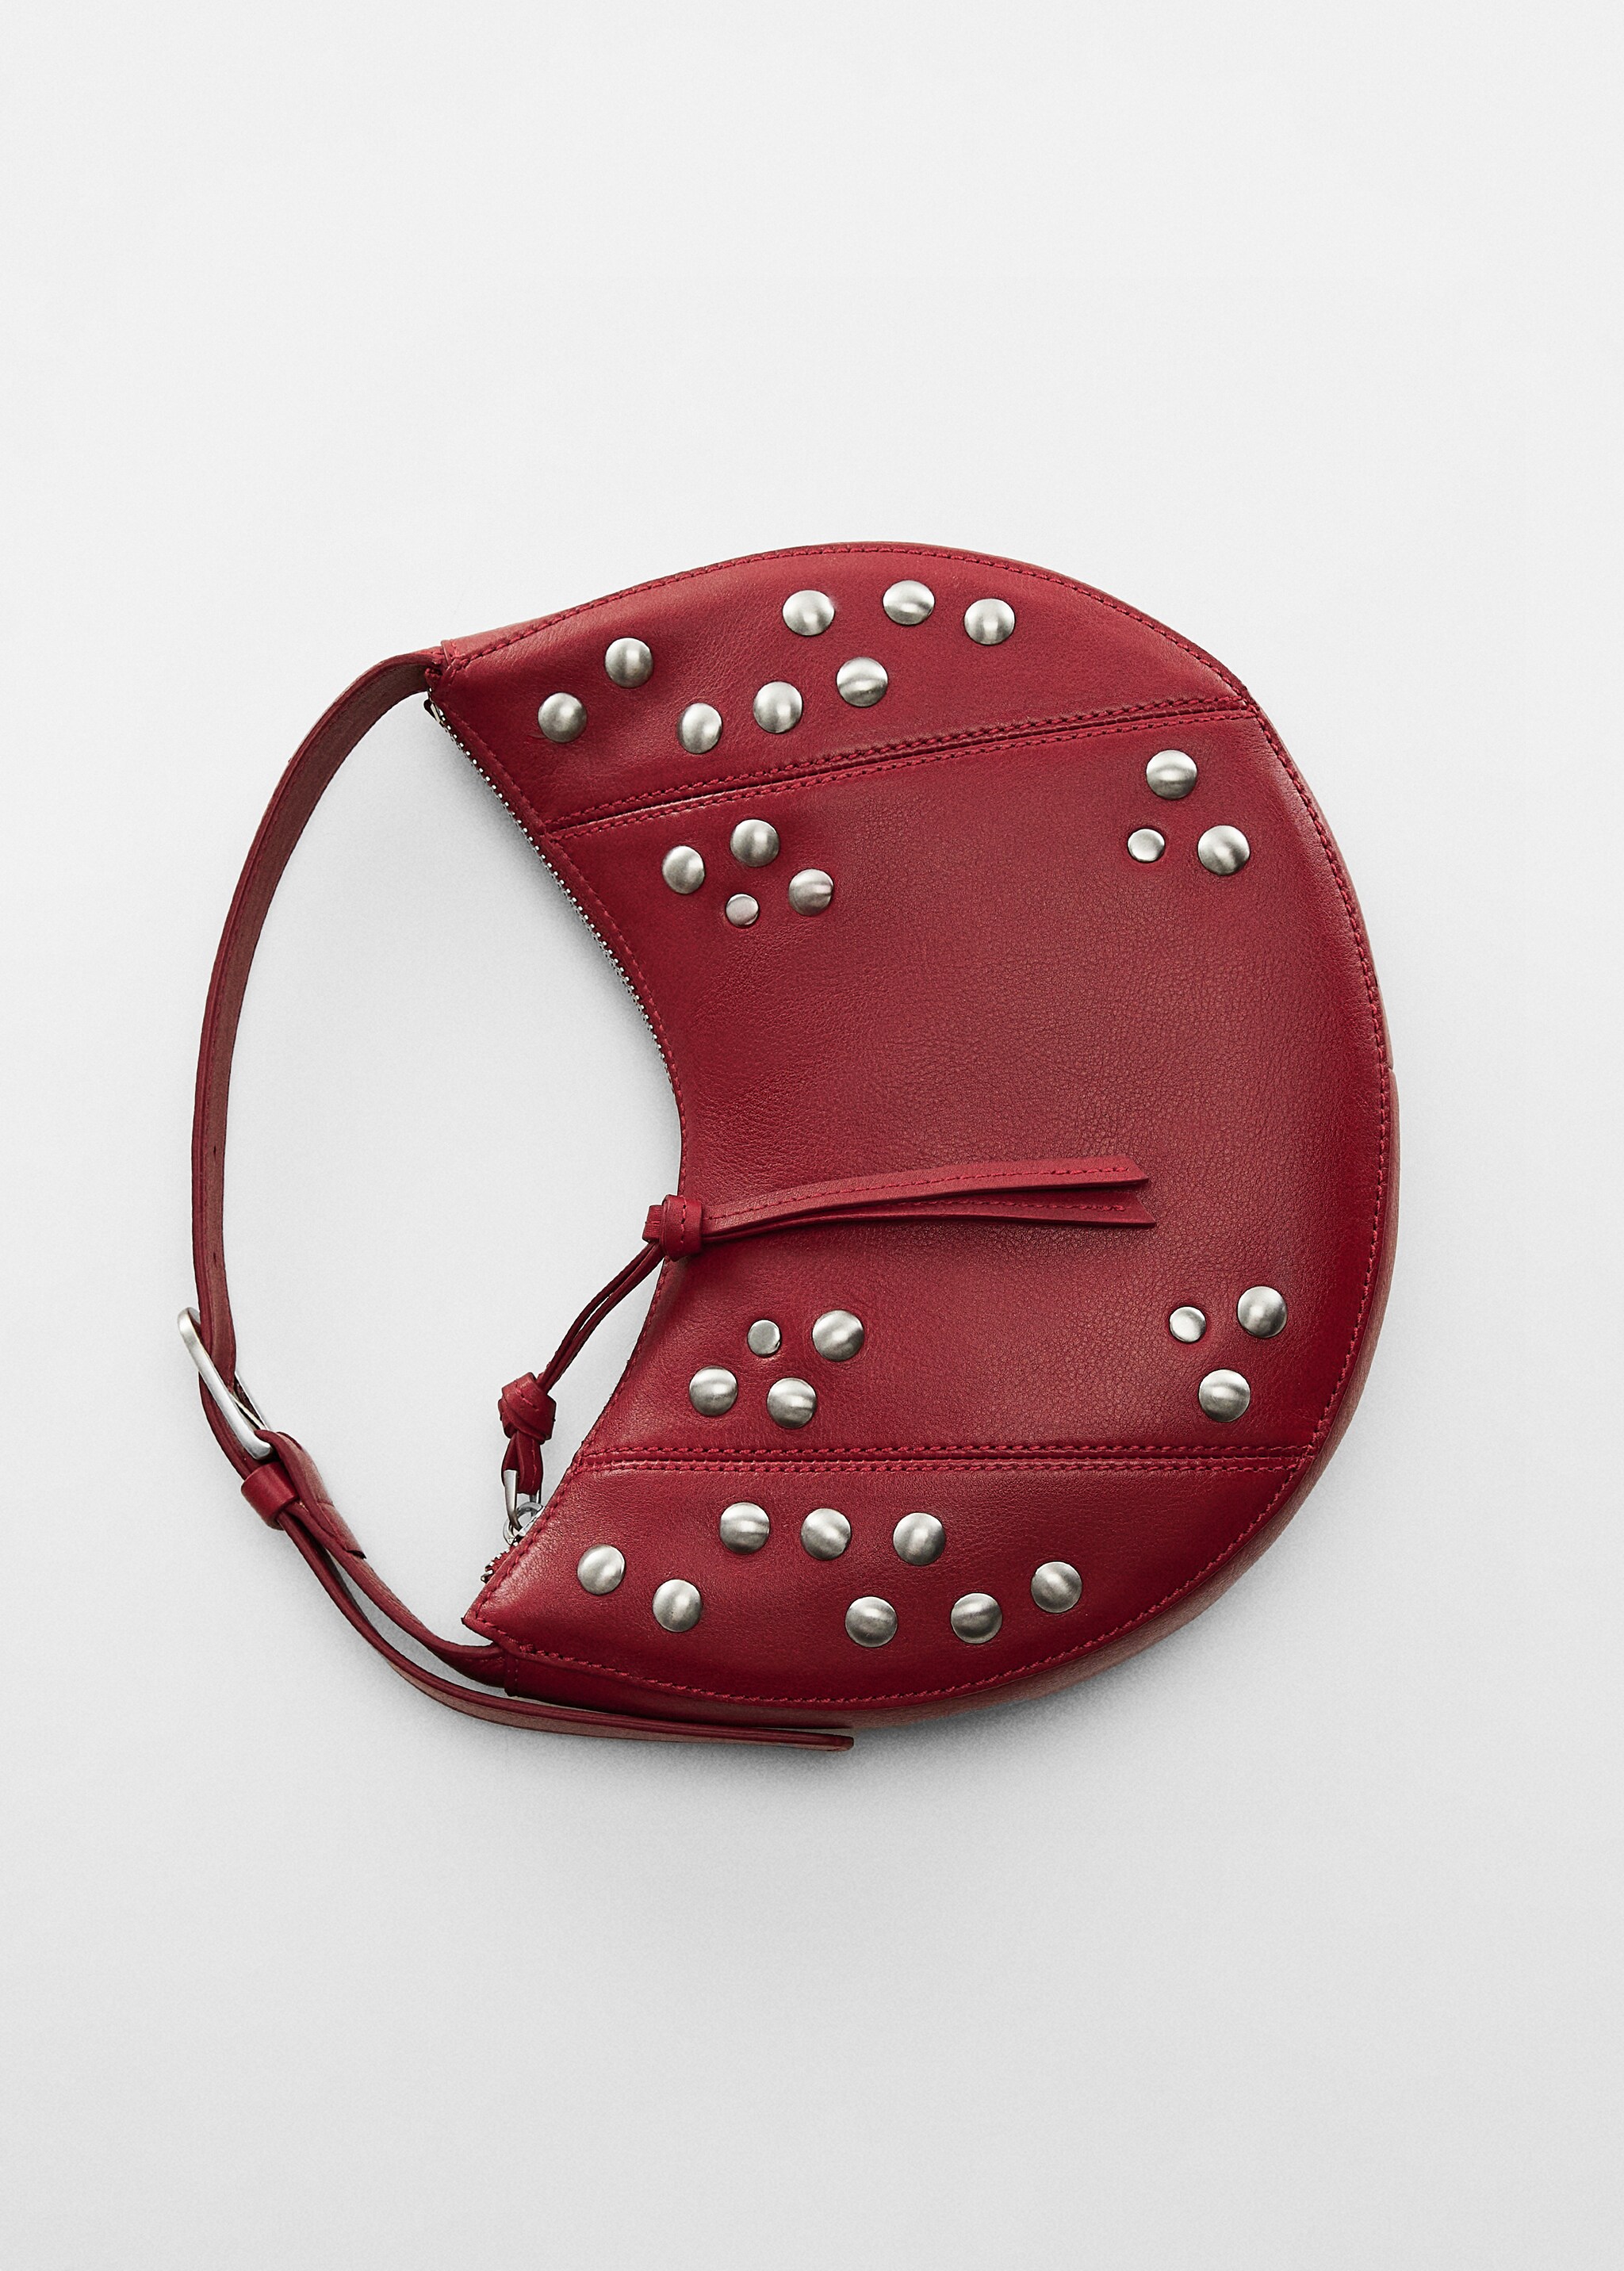 Stud leather bag - Details of the article 5